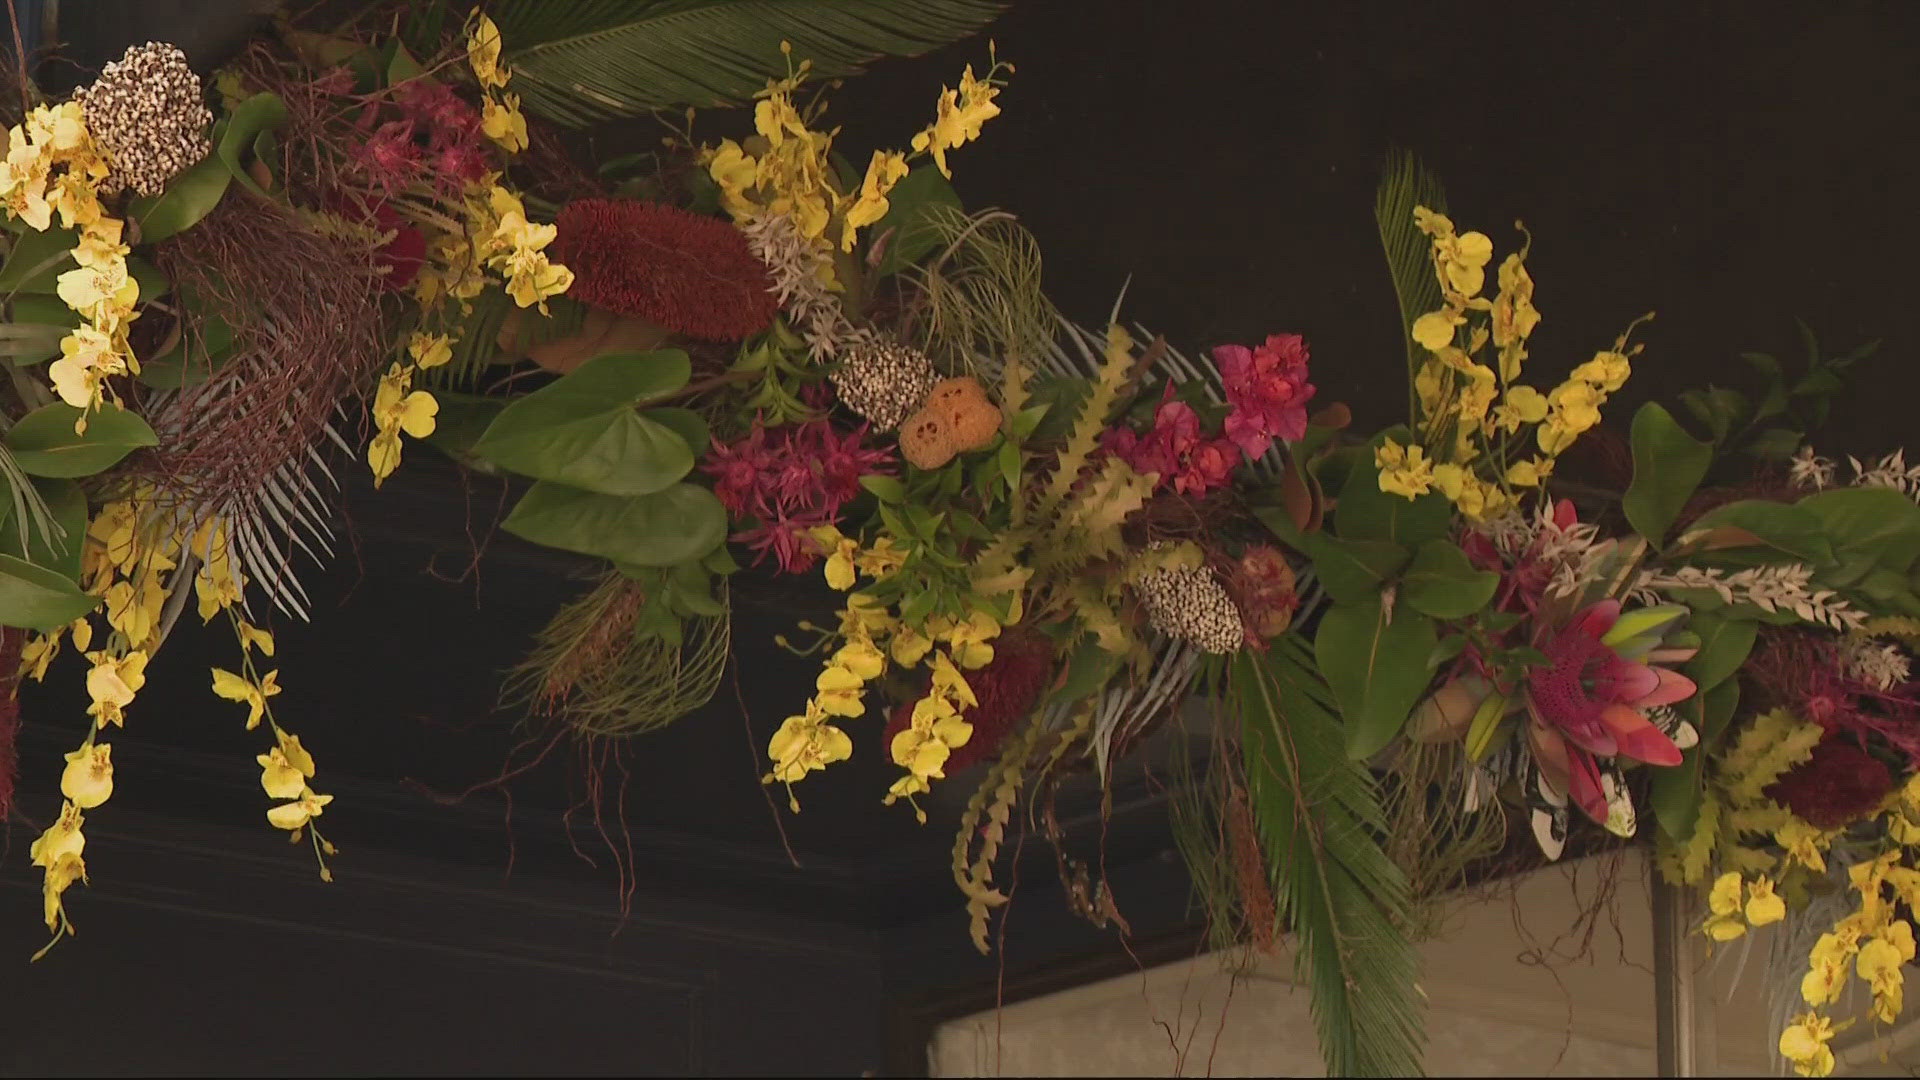 Starting Mother's Day weekend, over 20 flower installations will adorn downtown businesses, restaurants and hotels in Portland's second annual Bloom Tour.